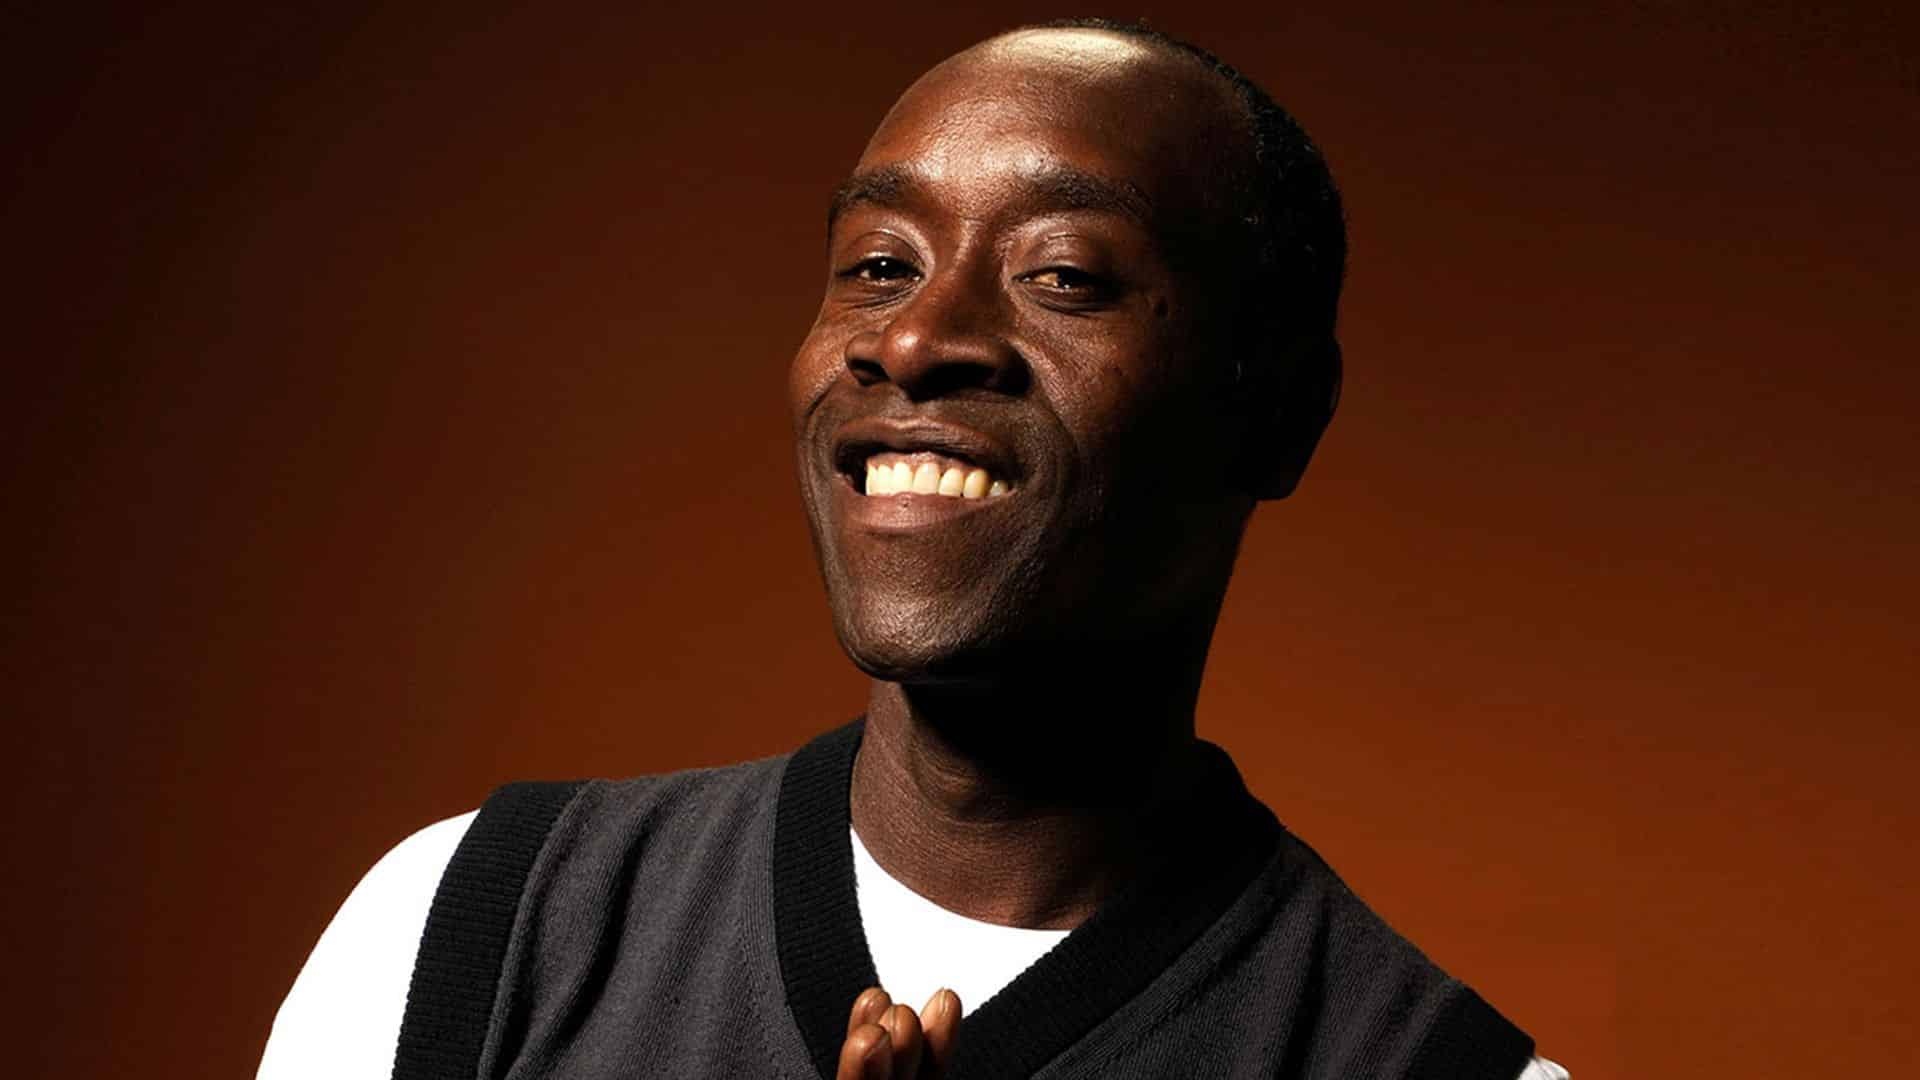 Don Cheadle wallpapers, Captivating visuals, Photo collection, Cool wallpapers, 1920x1080 Full HD Desktop